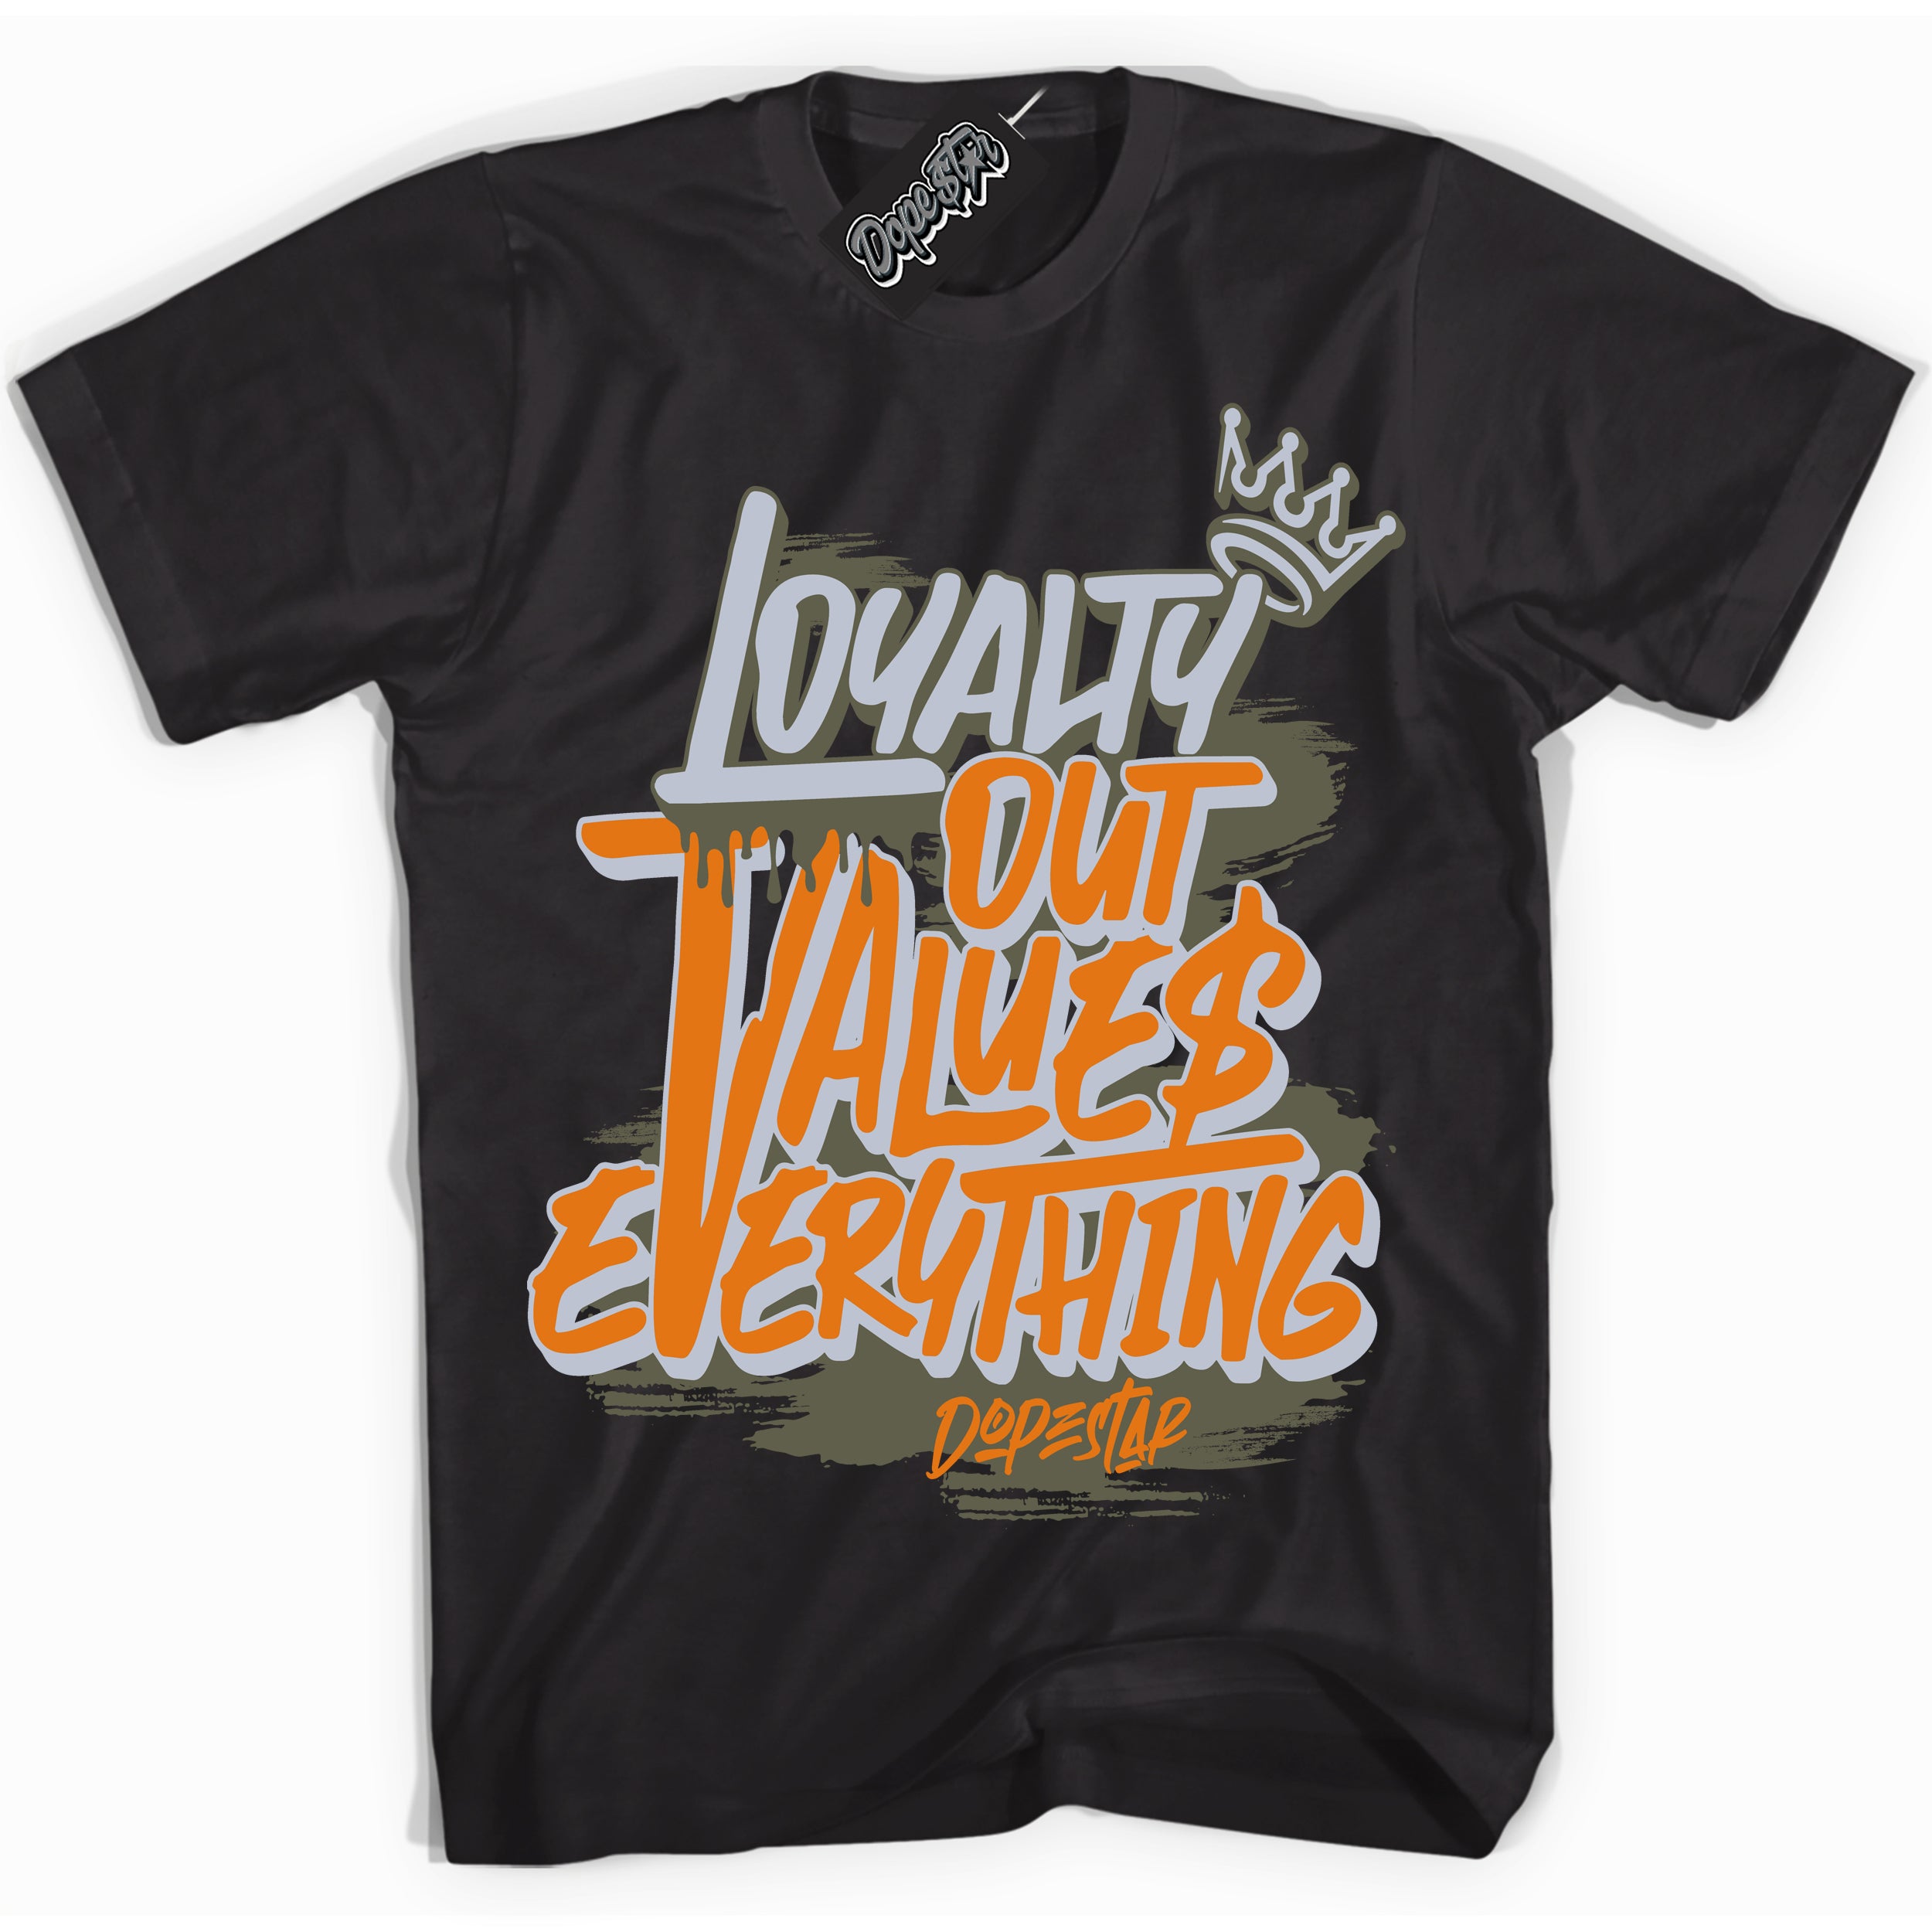 Cool Black Shirt with “ Loyalty Out Values Everything” design that perfectly matches Olive 5s Sneakers.